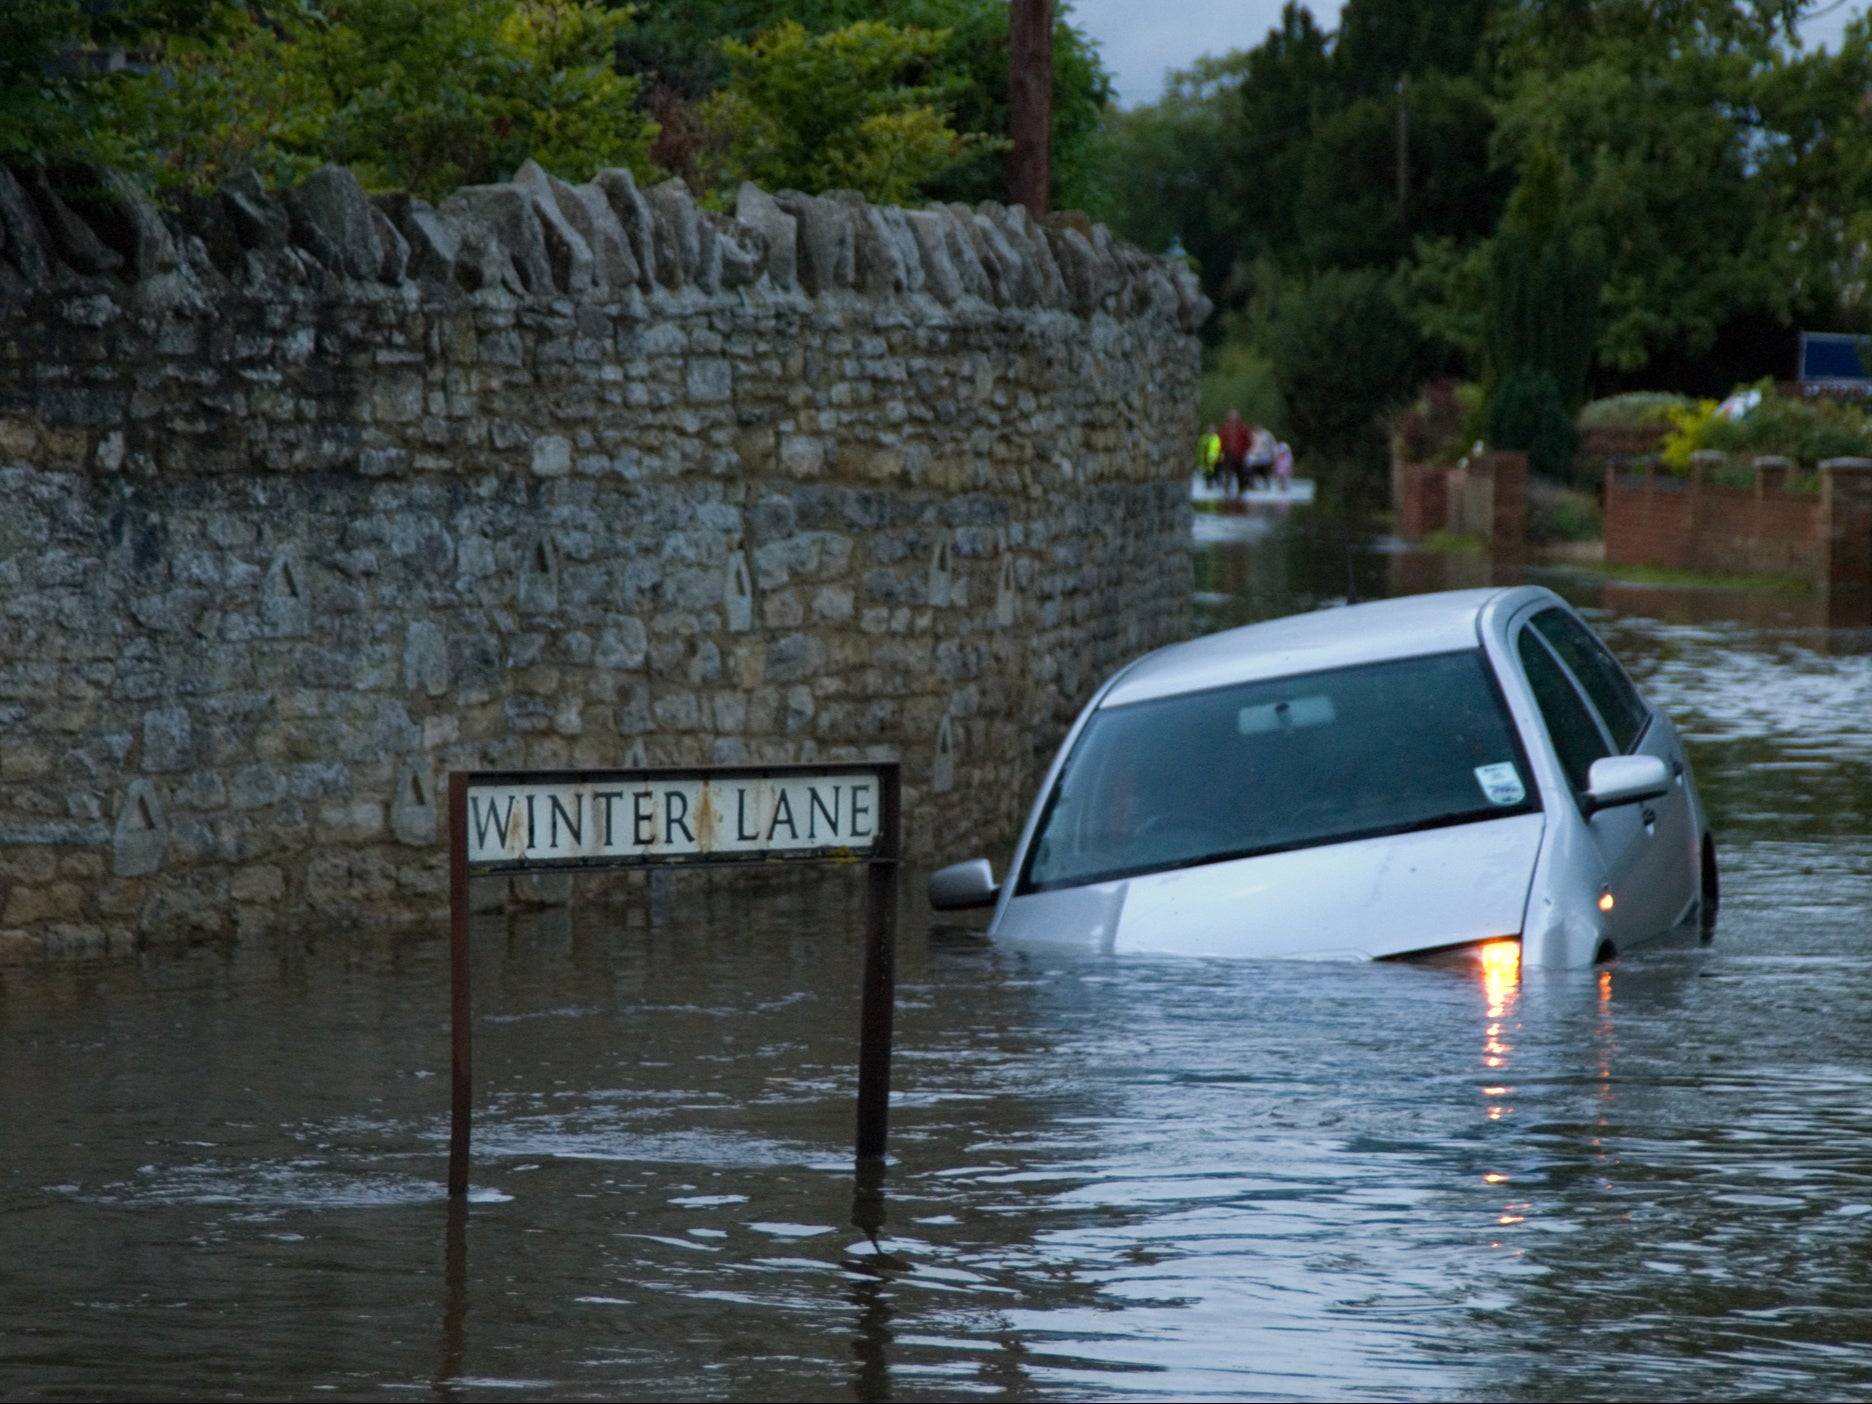 Flooding in Oxfordshire. Just 30cm of flowing water is enough to float a car, the Environment Agency has warned